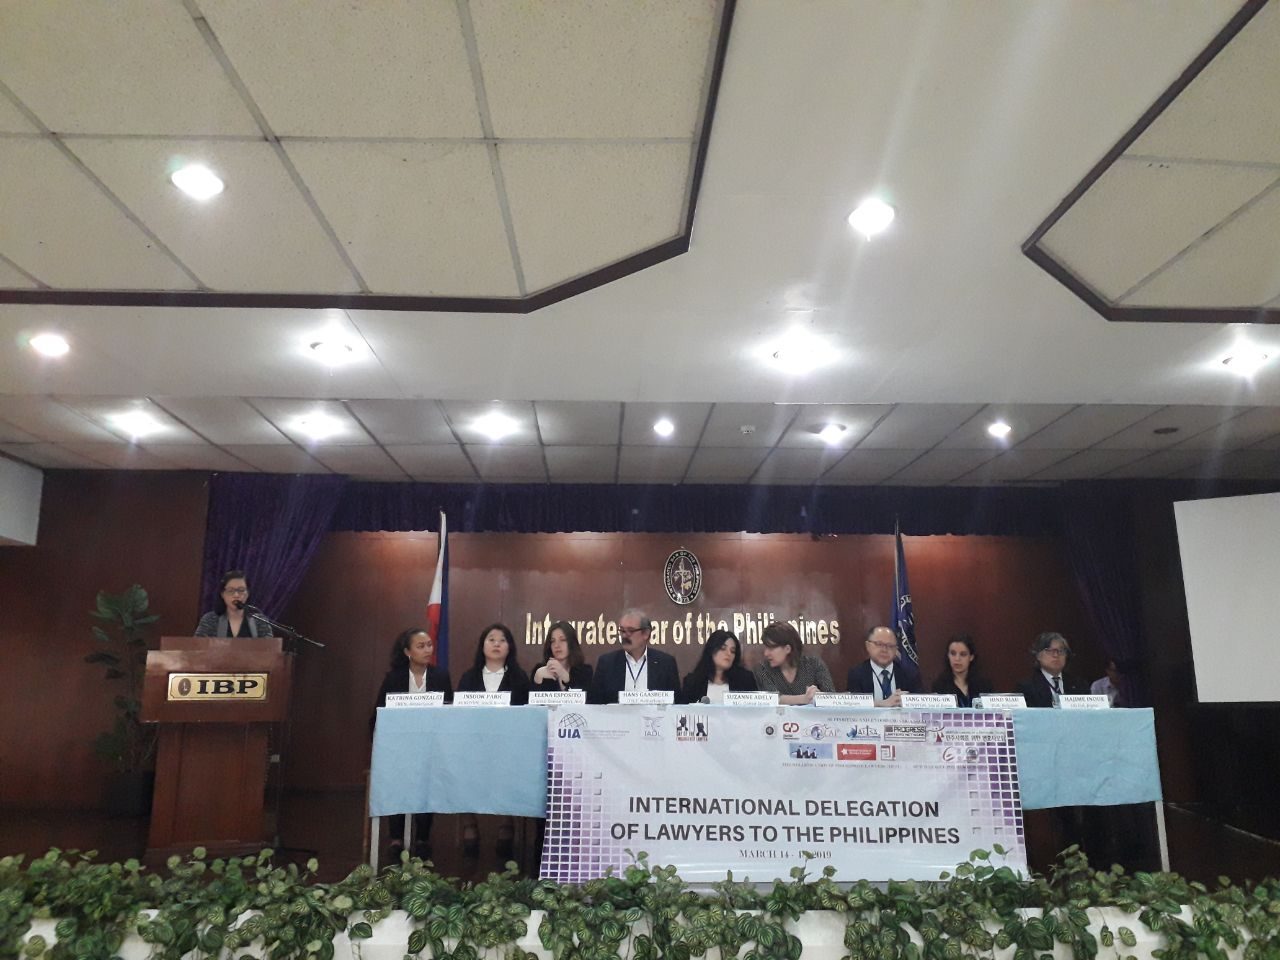 International probers: No effective investigation of lawyer killings in PH